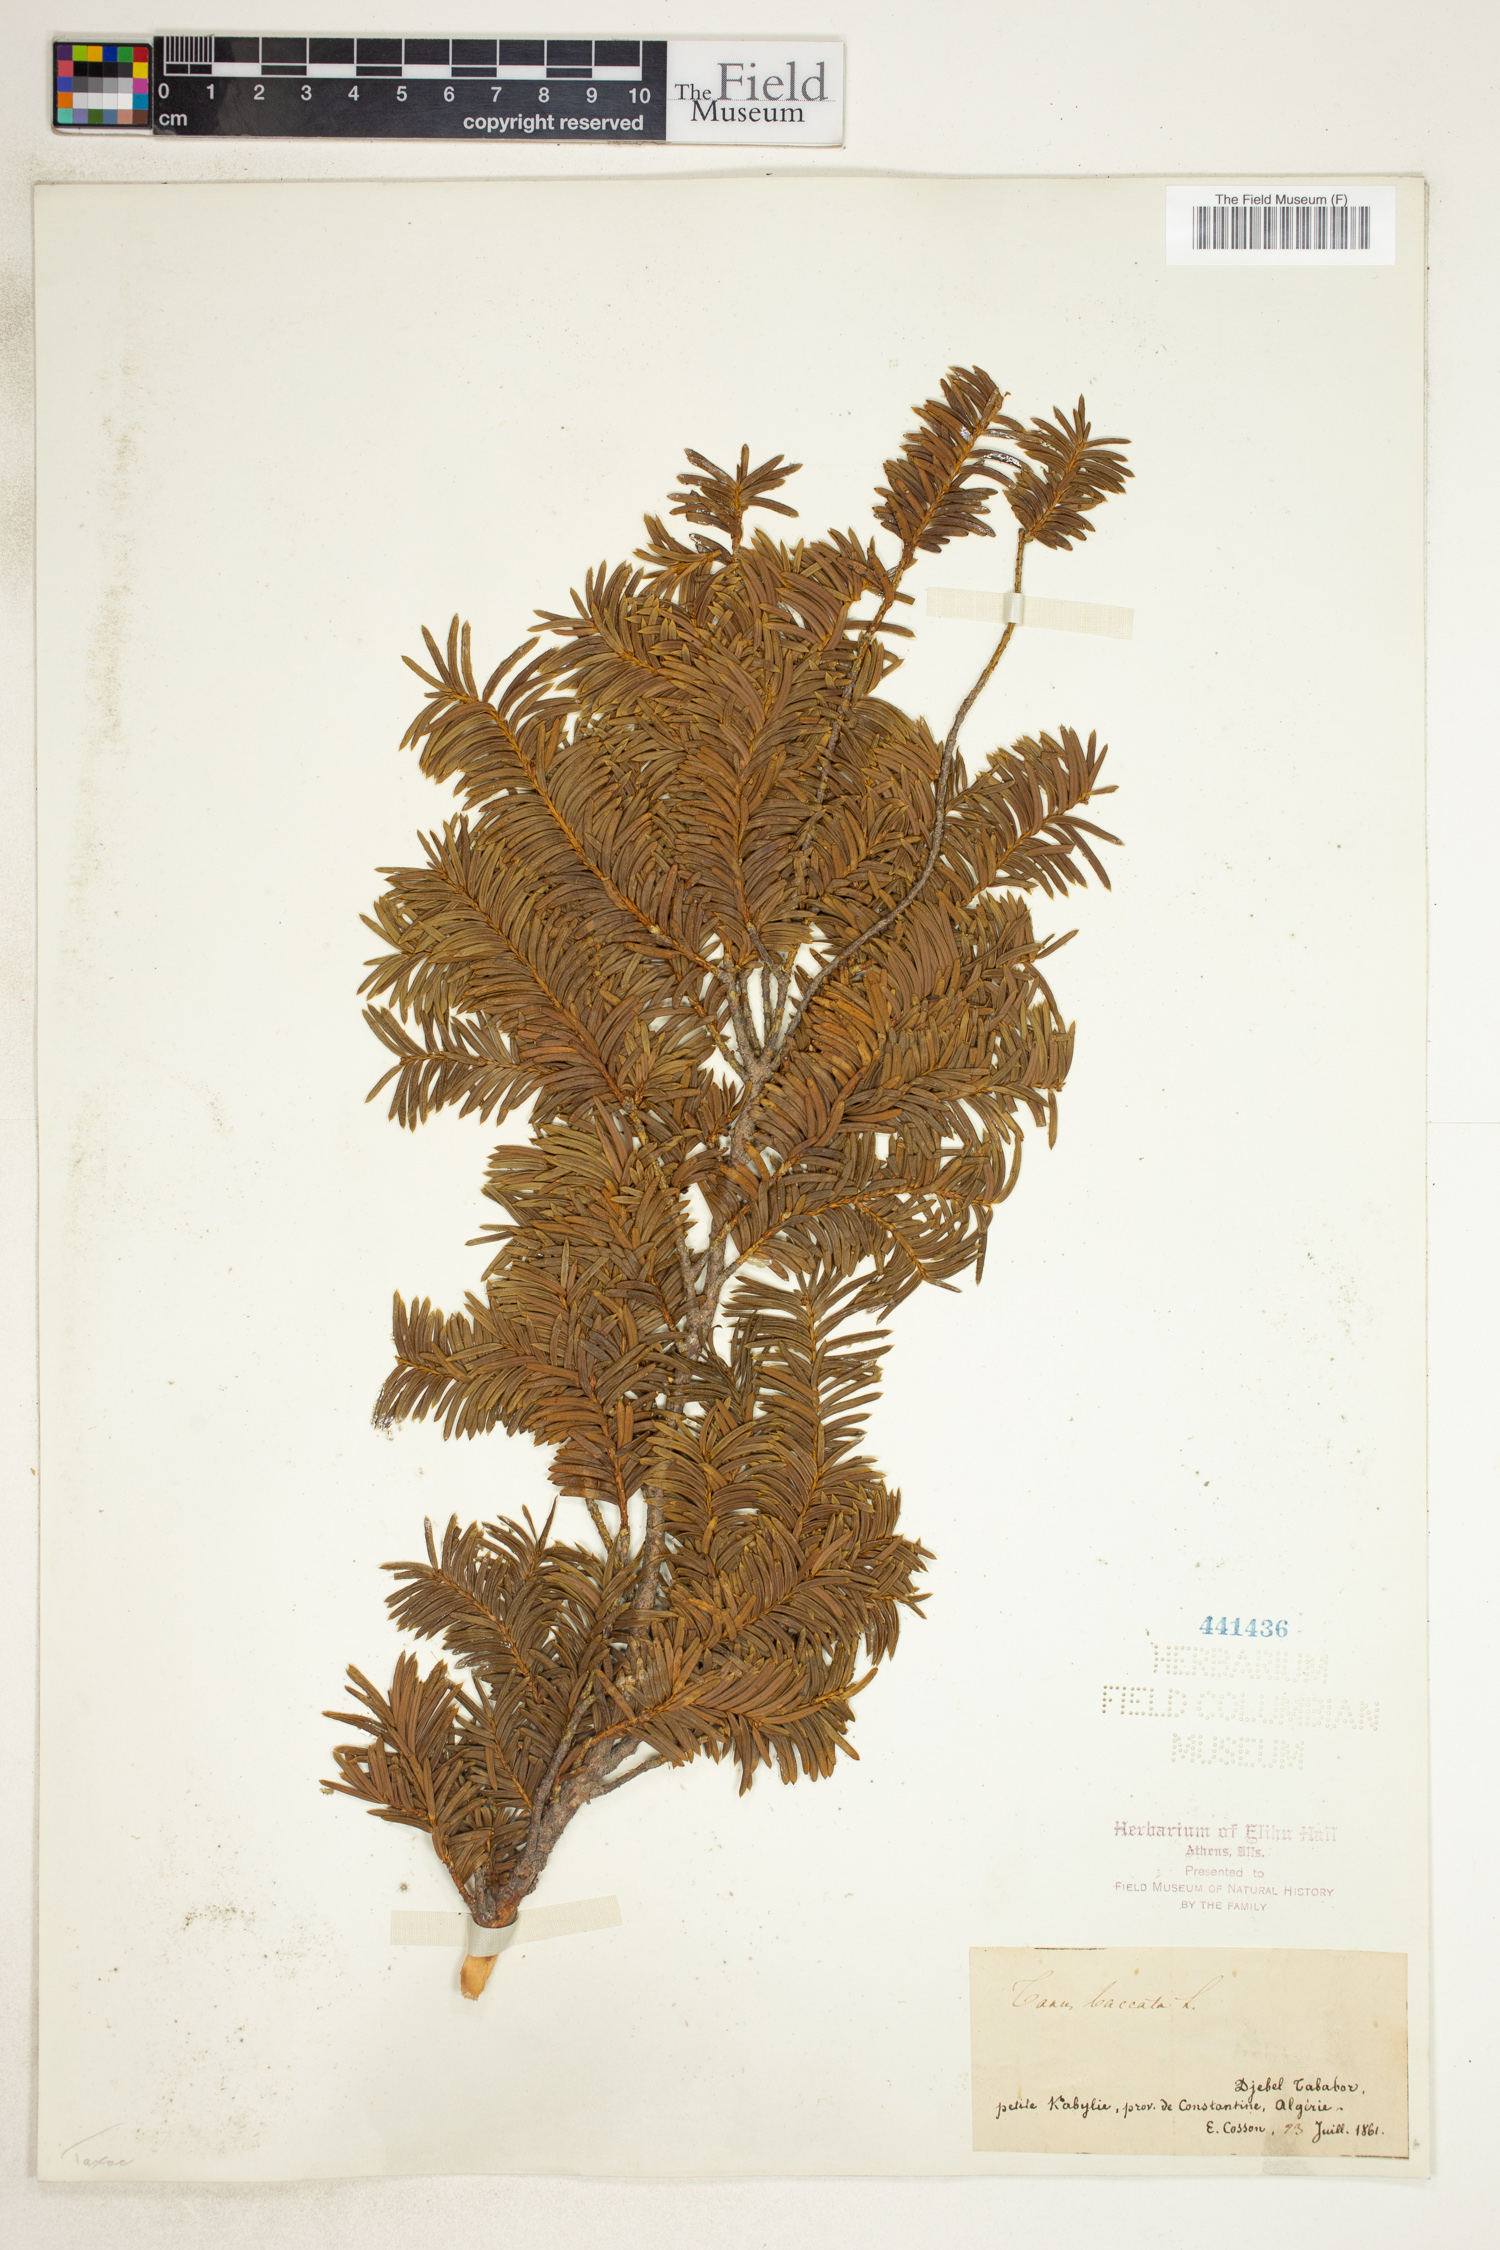 Taxus baccata image